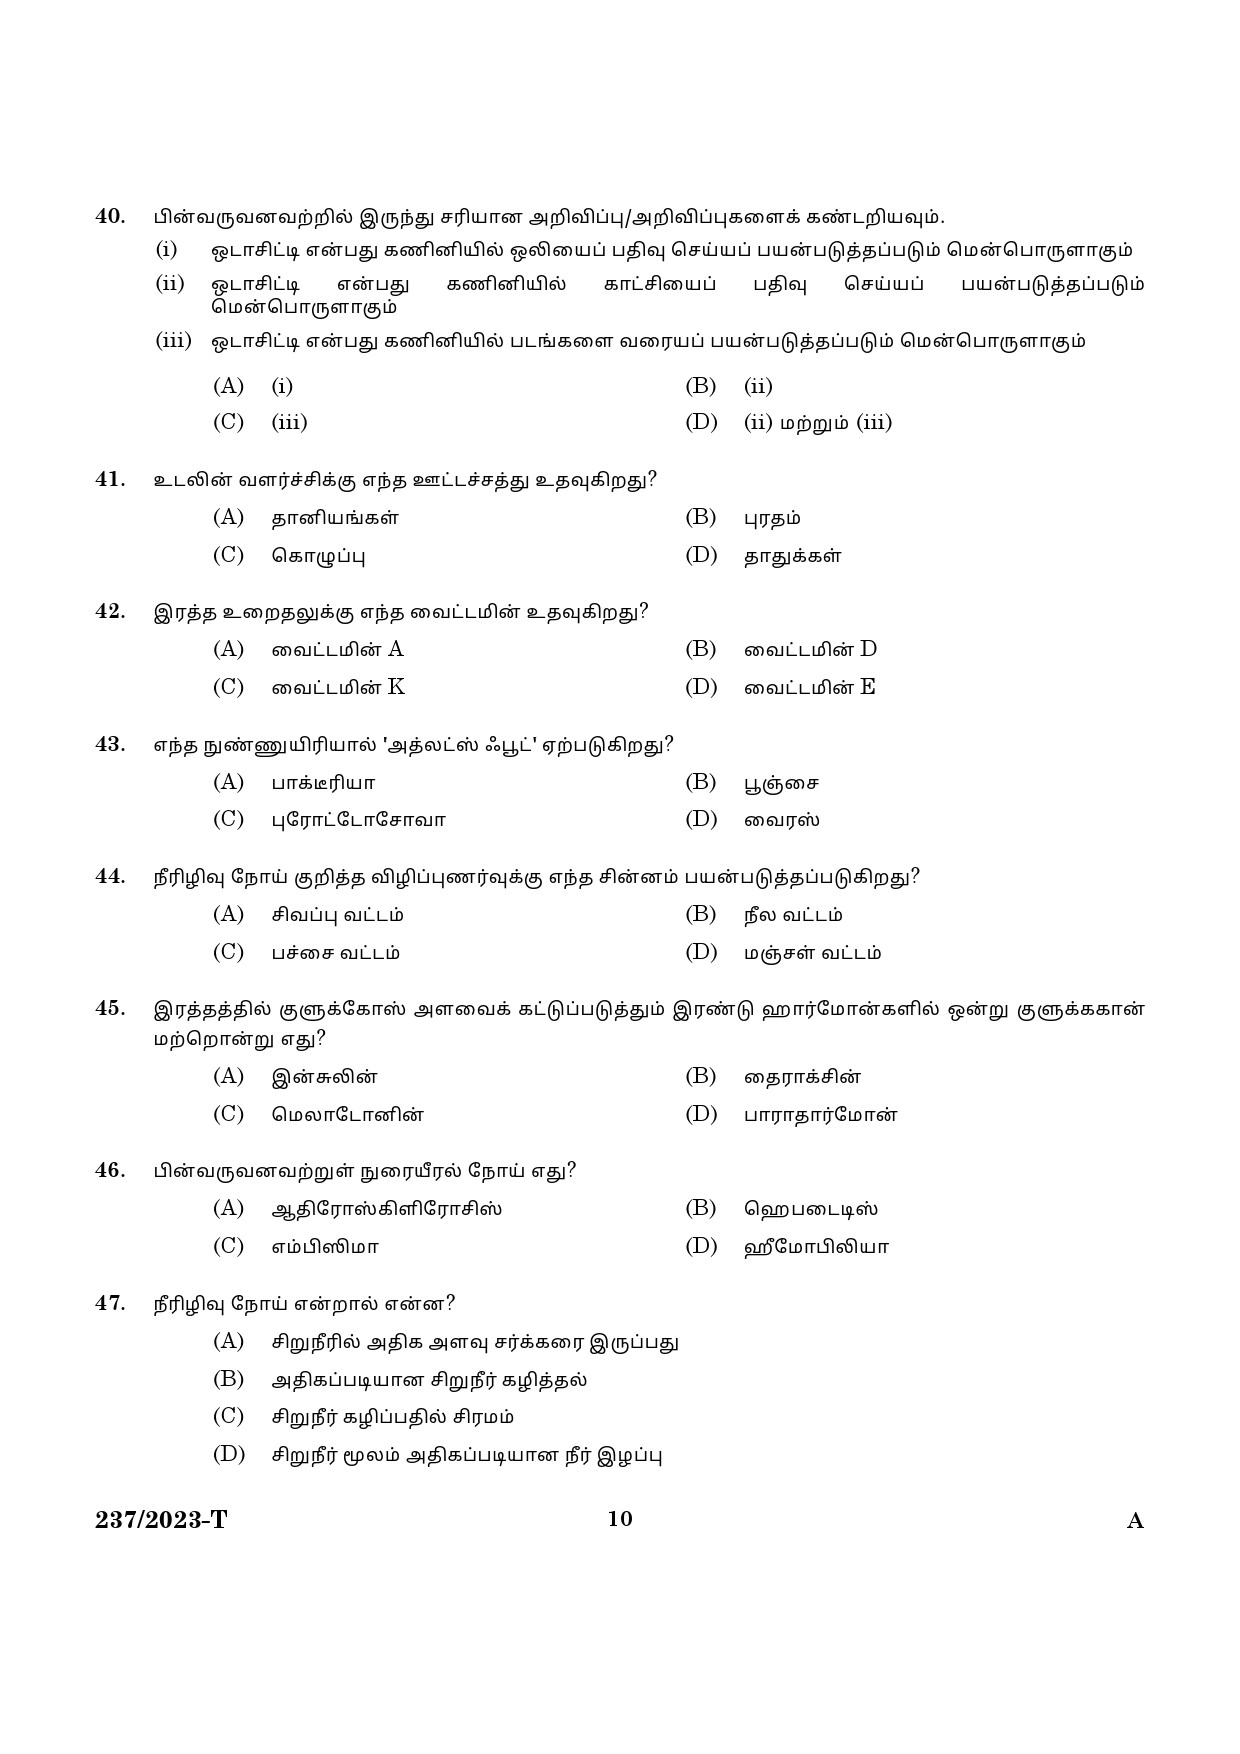 KPSC Forest Driver Tamil Exam 2023 Code 2372023 T 8